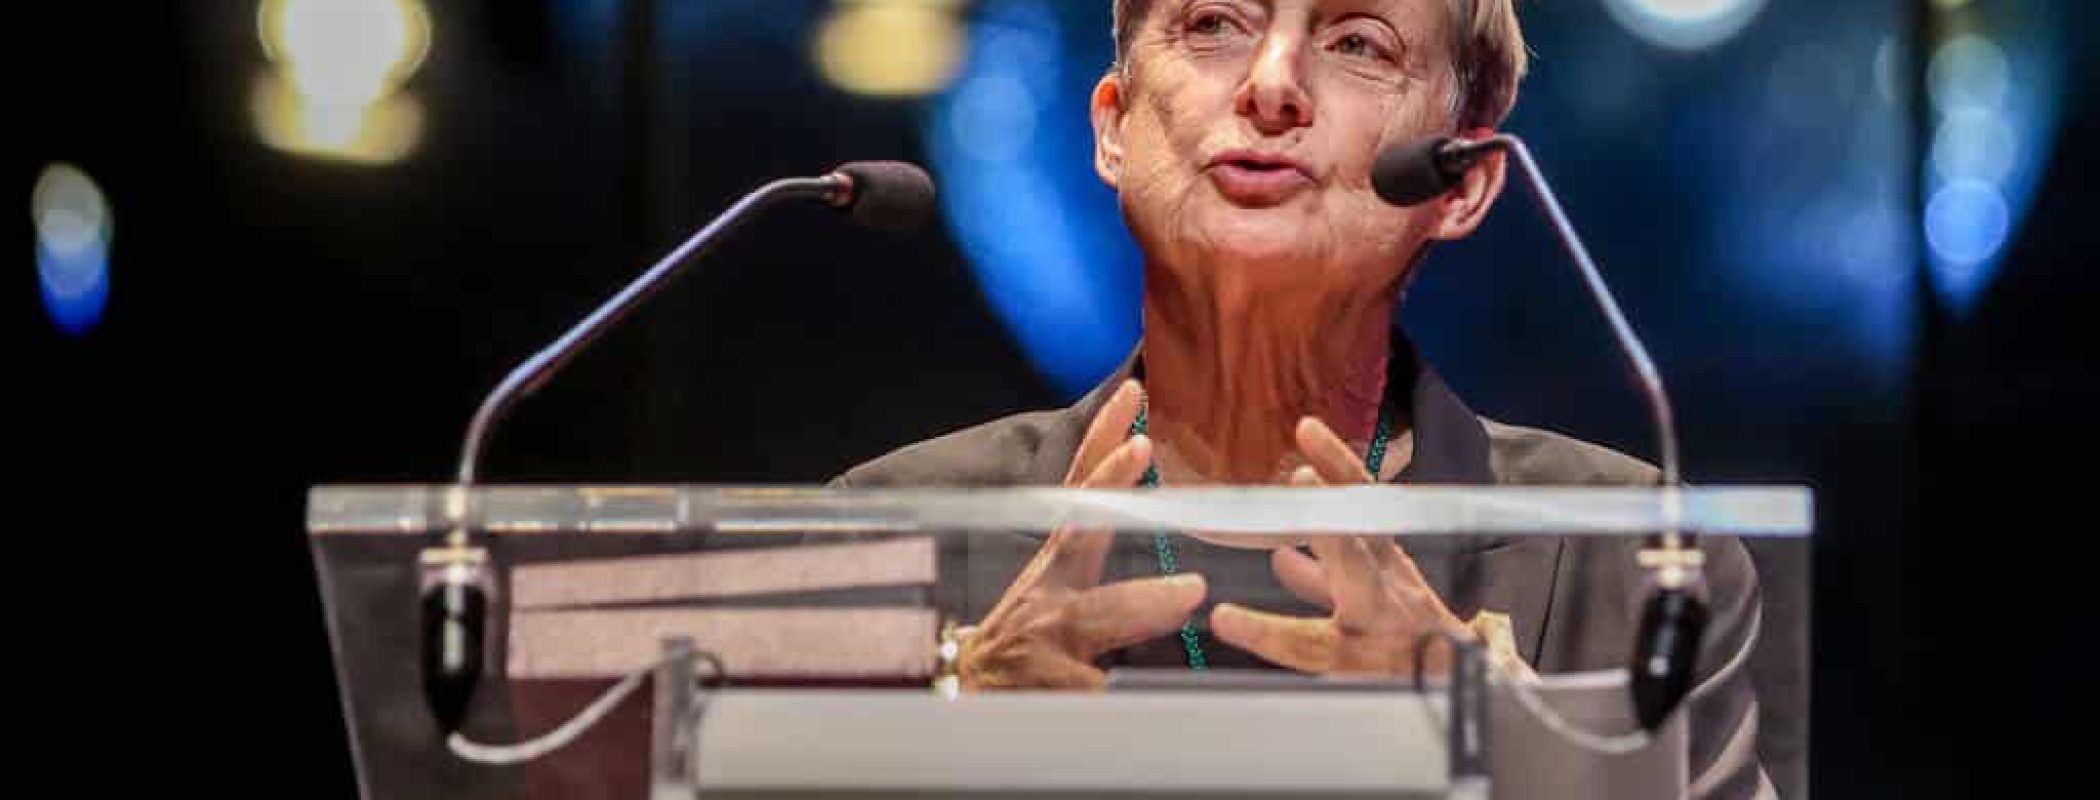 MADRID, SPAIN - OCTOBER 27: Philosopher Judith Butler receives the Gold Medal of the Circulo de Bellas Artes, on 27 October, 2022 in Madrid, Spain. Butler is considered one of the world's most influential intellectuals. Her contributions in the fields of feminist theory, queer theory and gender studies have had a notable impact on fields as diverse as political theory, literary studies, psychoanalysis and law. (Photo By Ricardo Rubio/Europa Press via Getty Images)